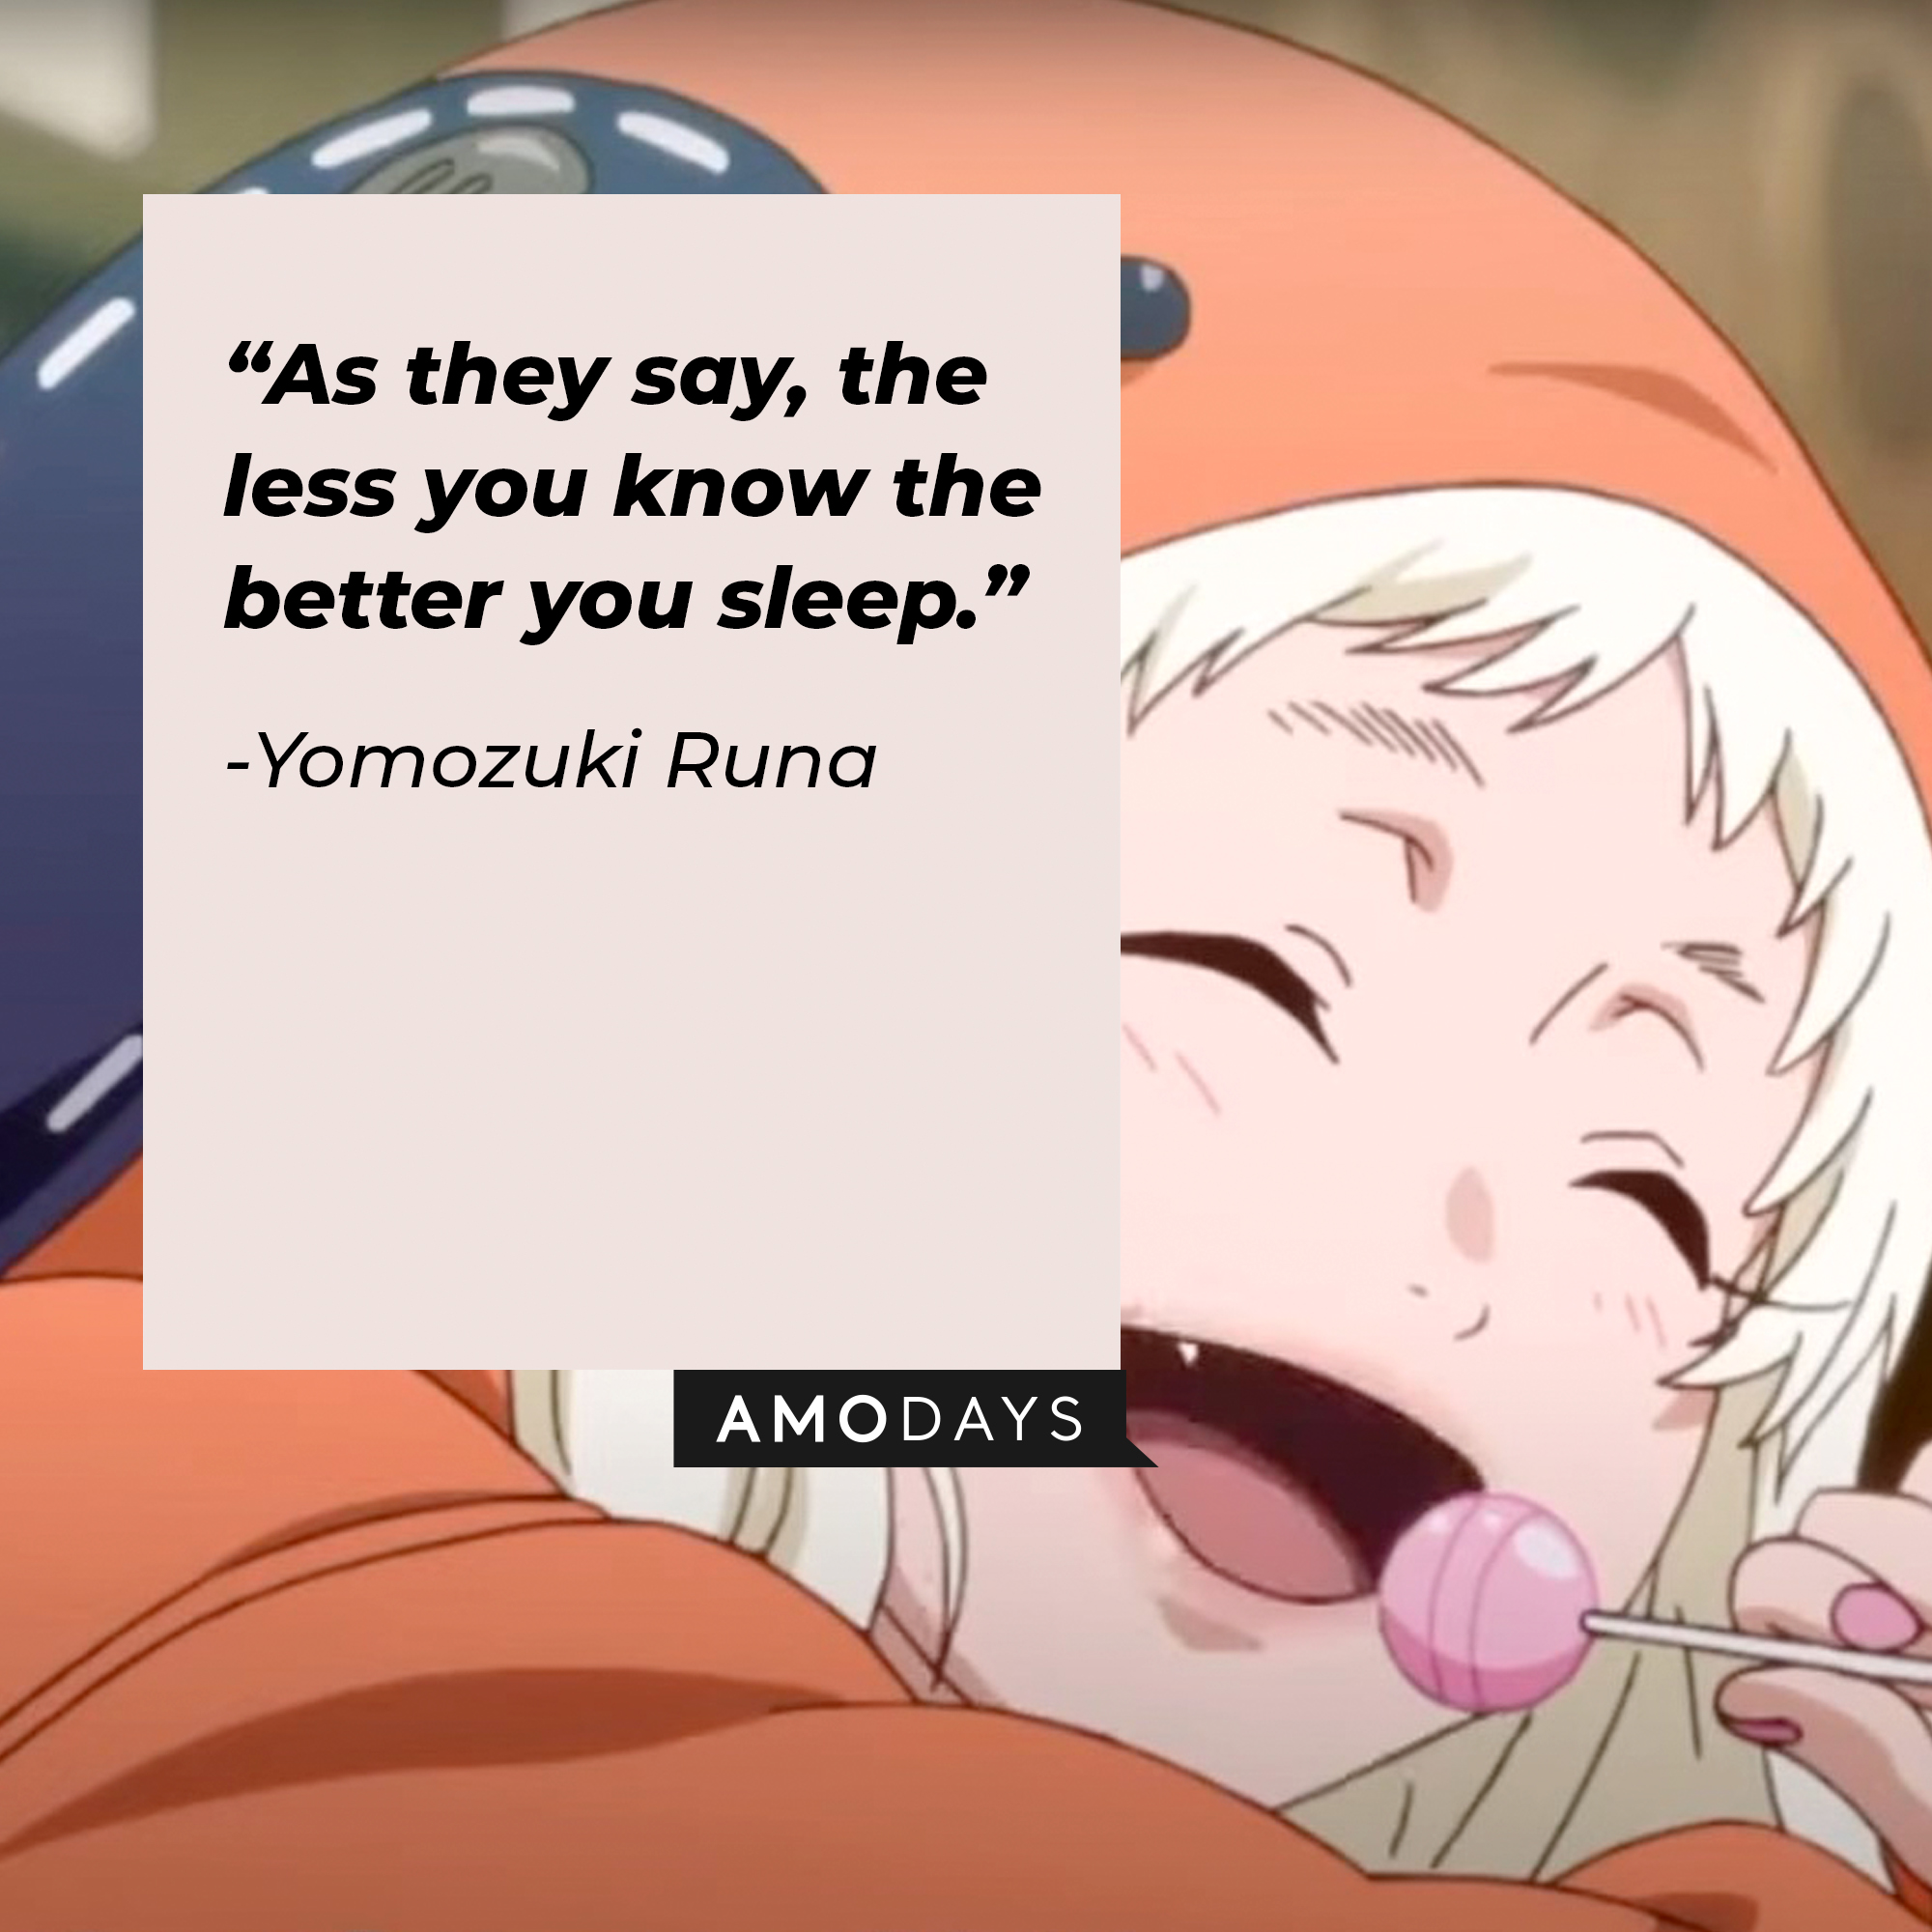 A picture of Yomozuki Runa with her quote: “As they say, the less you know the better you sleep.” | Source: youtube.com/netflixanime